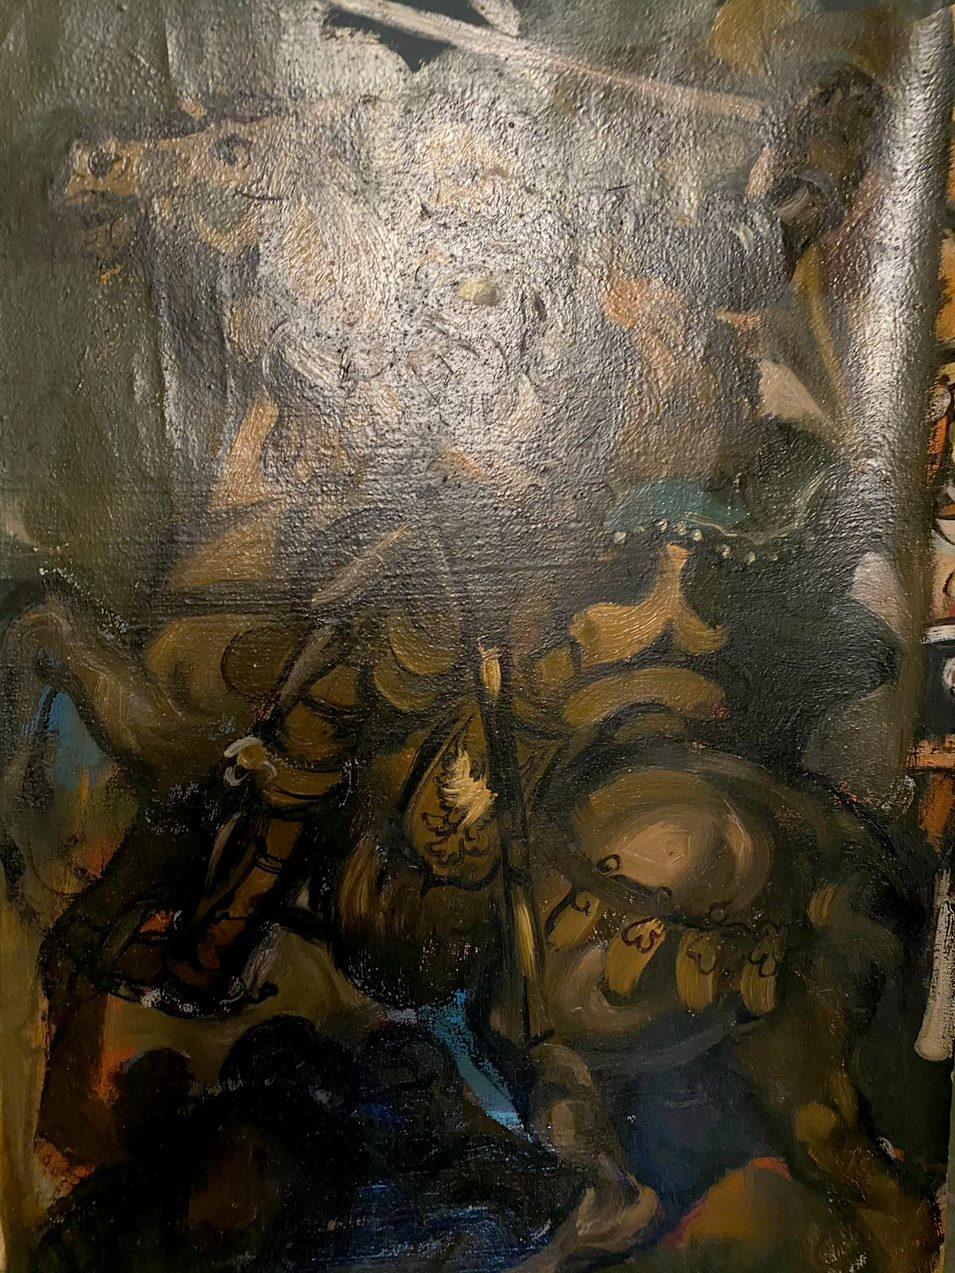 Artist: Alexander Litvinov
Work: Original oil painting, handmade artwork, one of a kind 
Medium: Oil on Canvas
Style: Classic Figurative
Year: 2000
Title: Cossack and Pole in Battle
Size1: 19.5